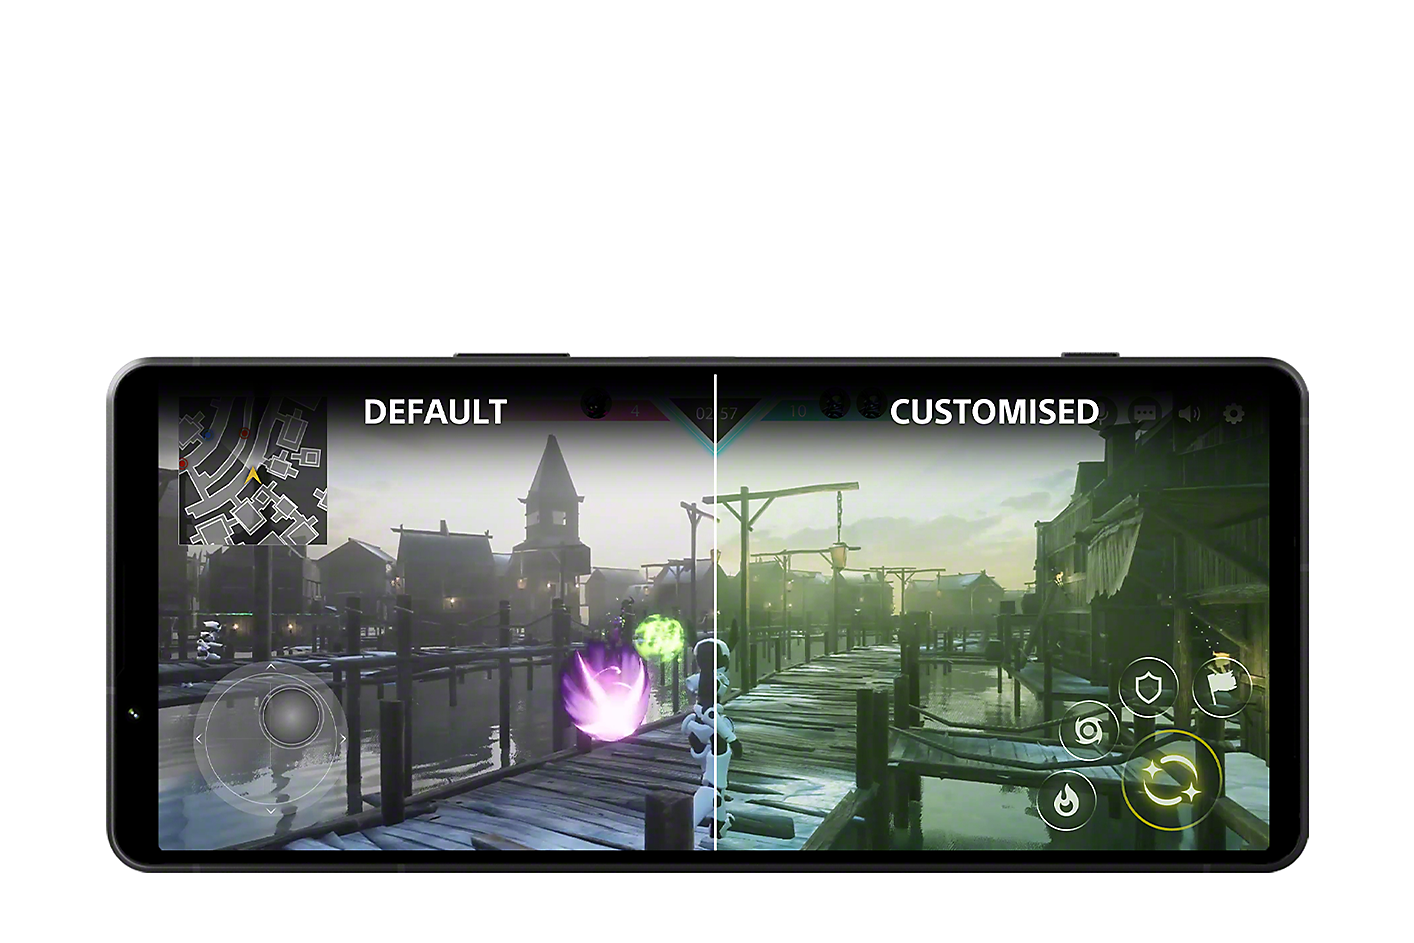 Xperia 1 V displaying an in-game image - the left-hand side shows default white balance, the right-hand side shows customised white balance